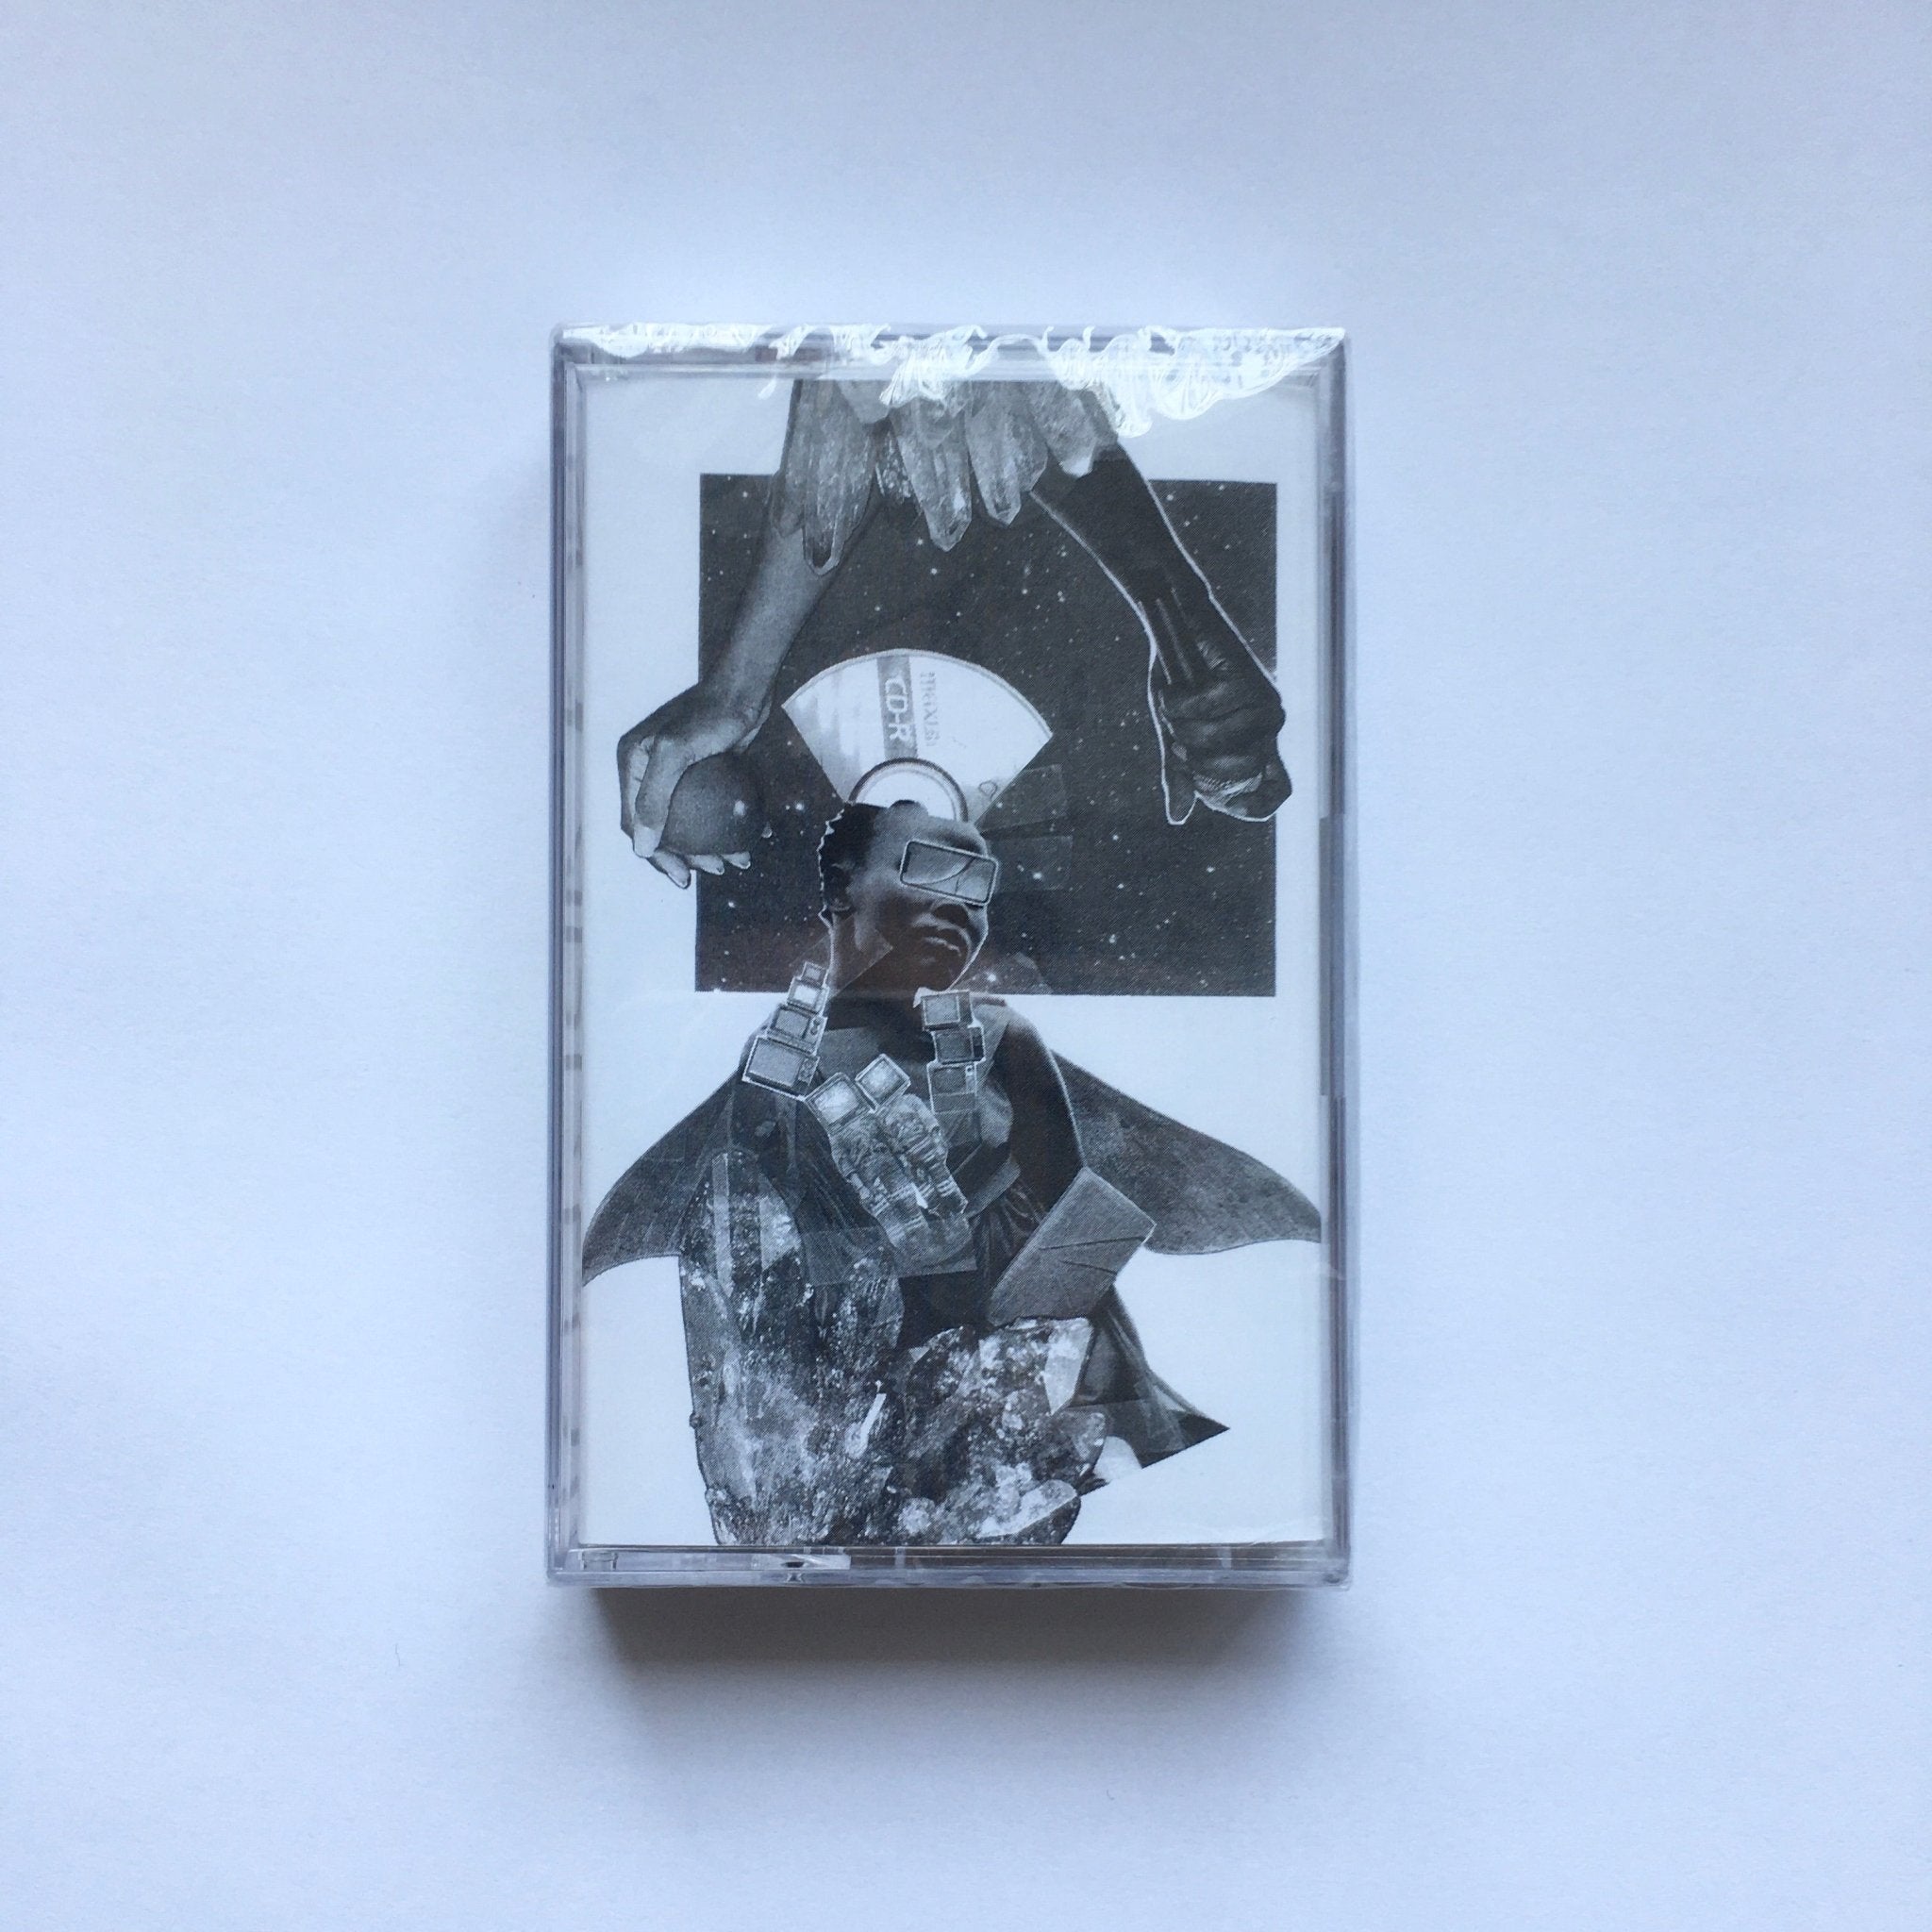 Solarized - A Ghost Across Hell From Me TAPE - Tape - SRA